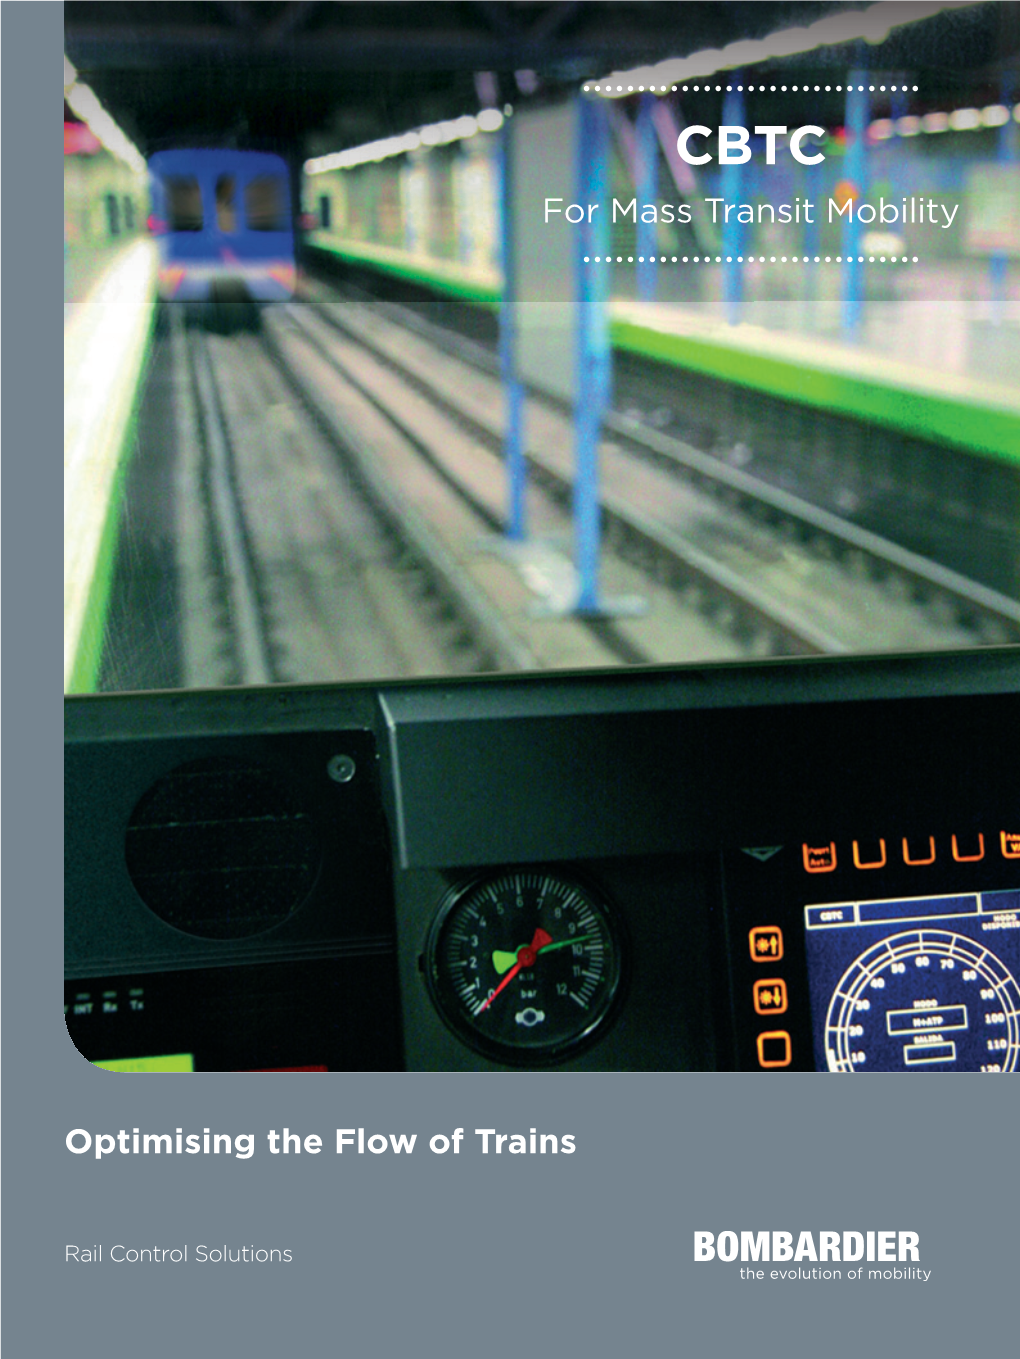 Optimising the Flow of Trains for Mass Transit Mobility